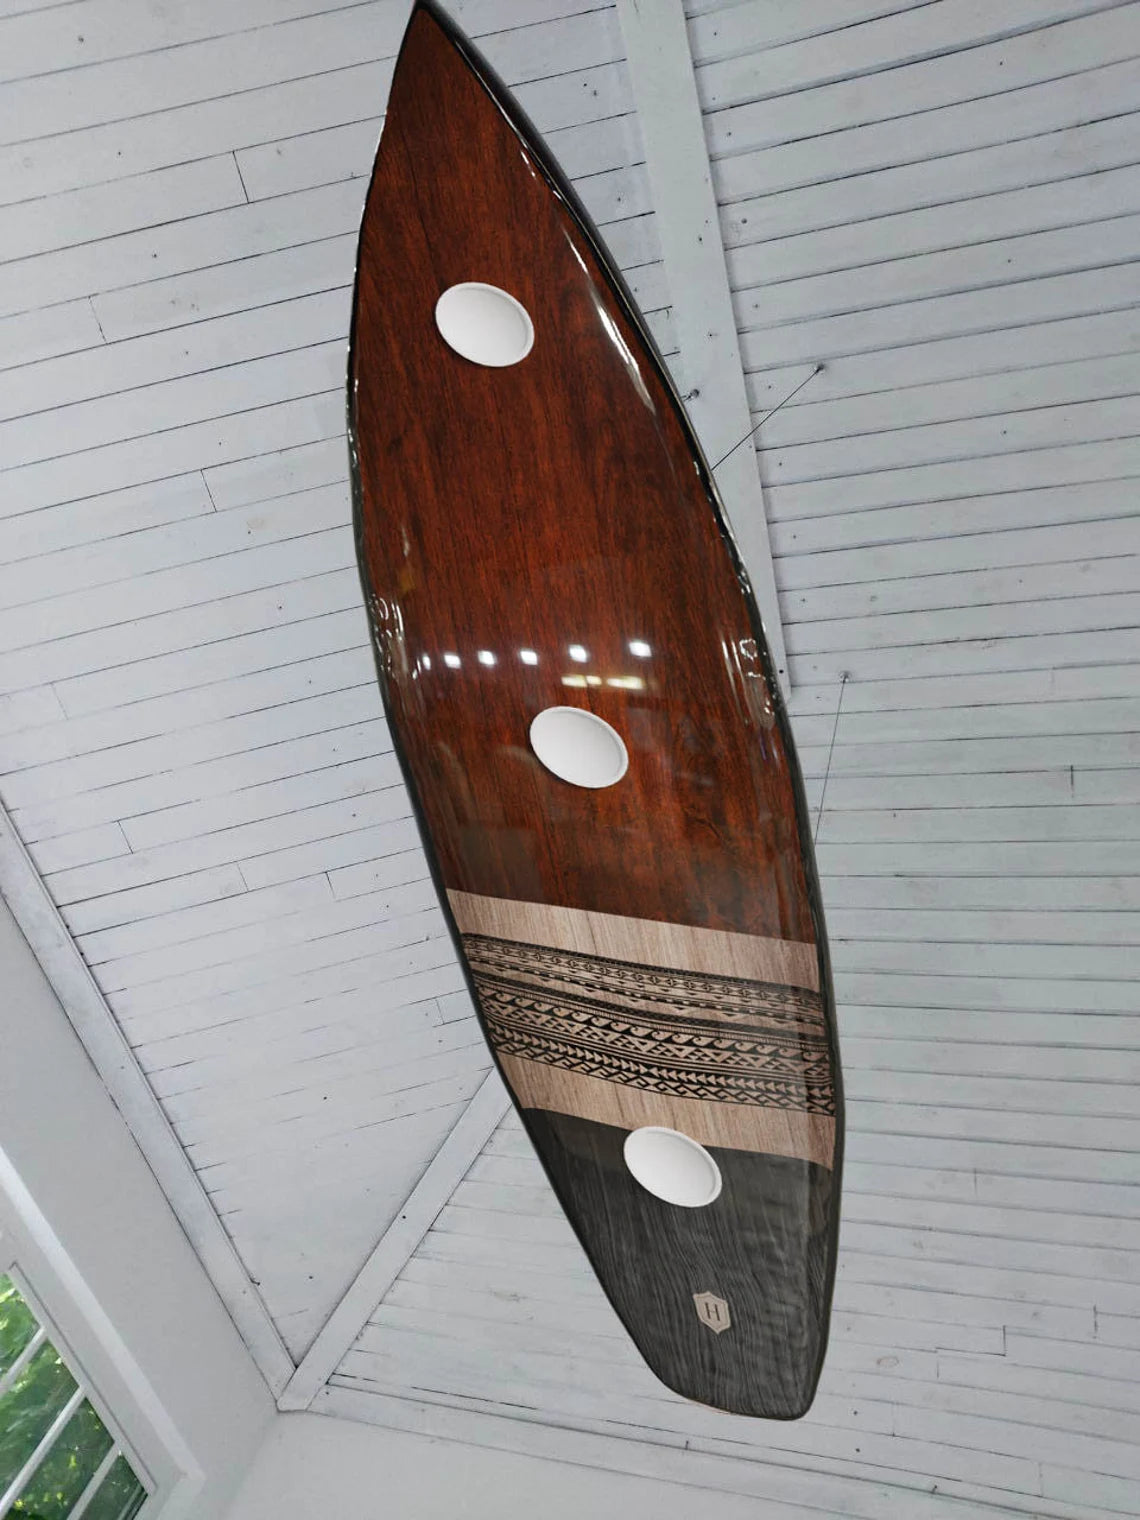 Ceiling Chandelier in the Shape of a Surfboard with a Maori Pattern